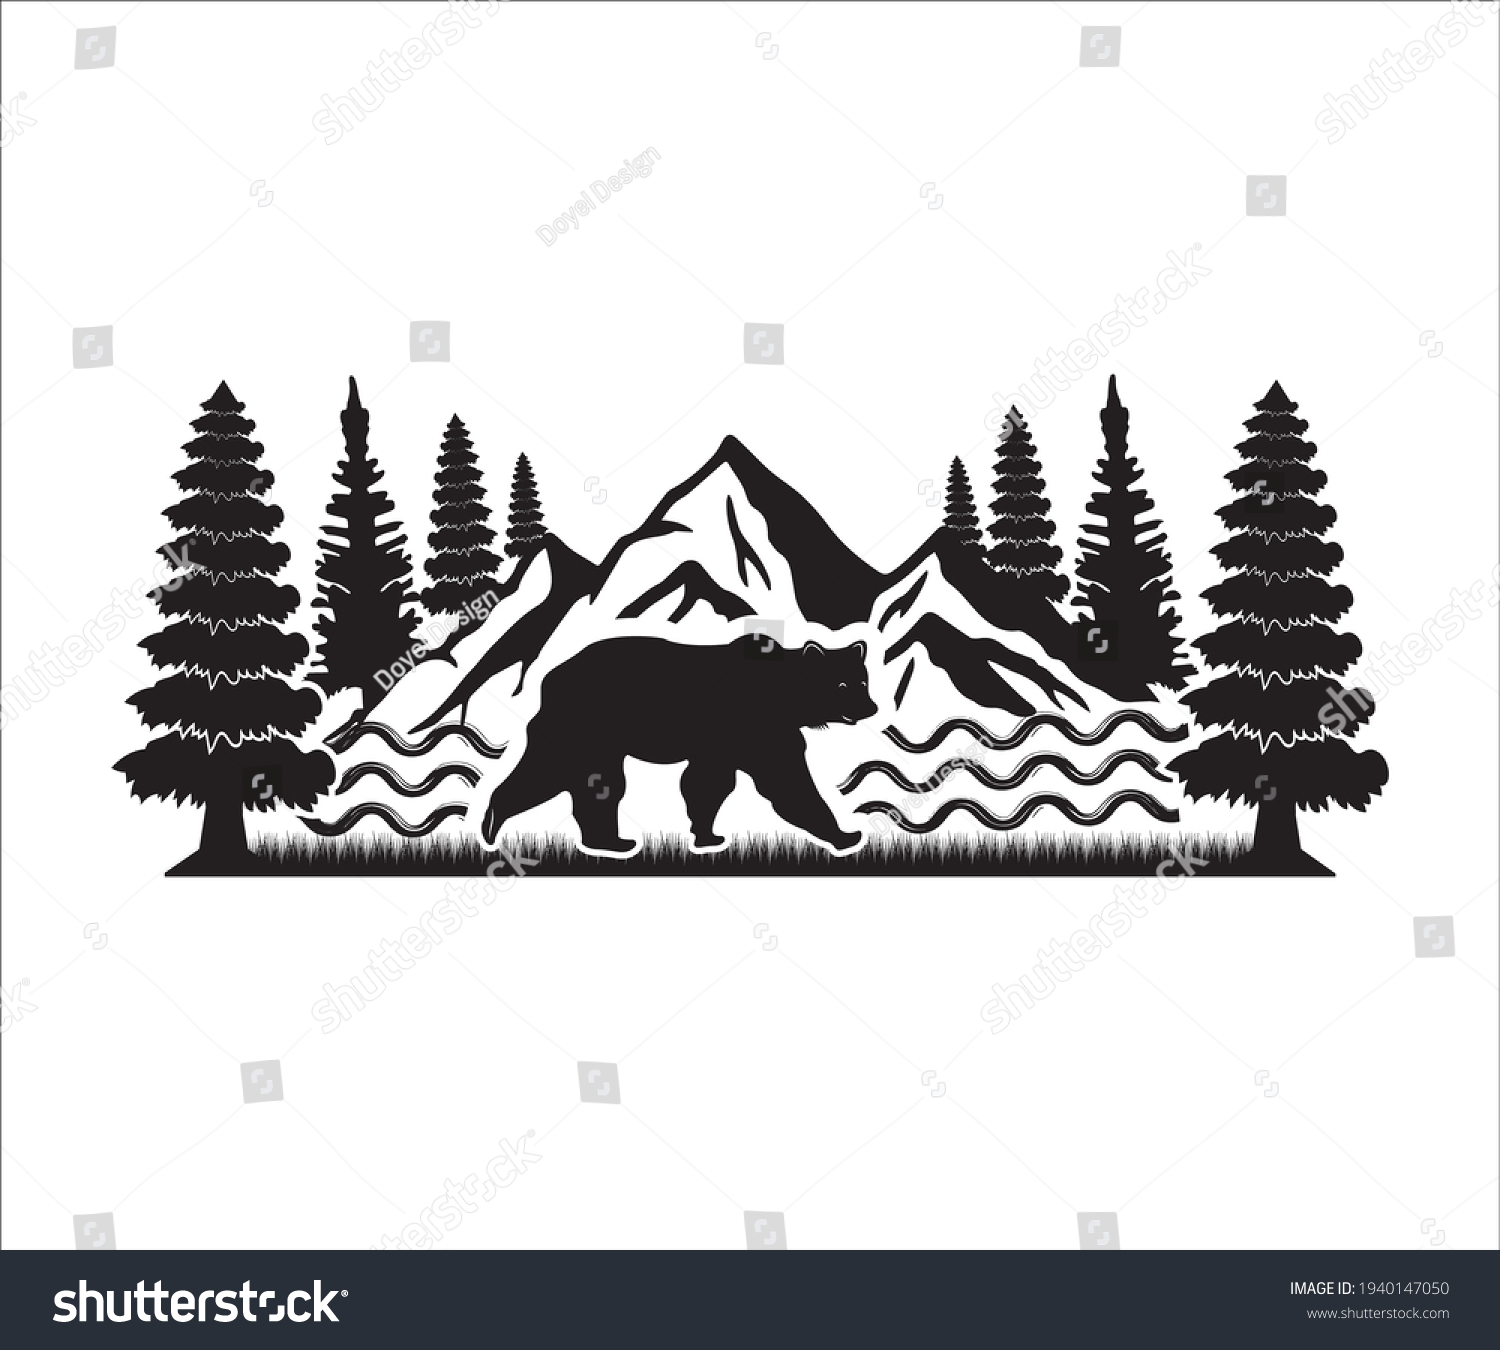 SVG of Mountain And Bear Printable Vector Illustration, Mountain Svg, Bear SVG, Mountain And Bear clipart, Tree Mountain Decoration, Nature Art svg